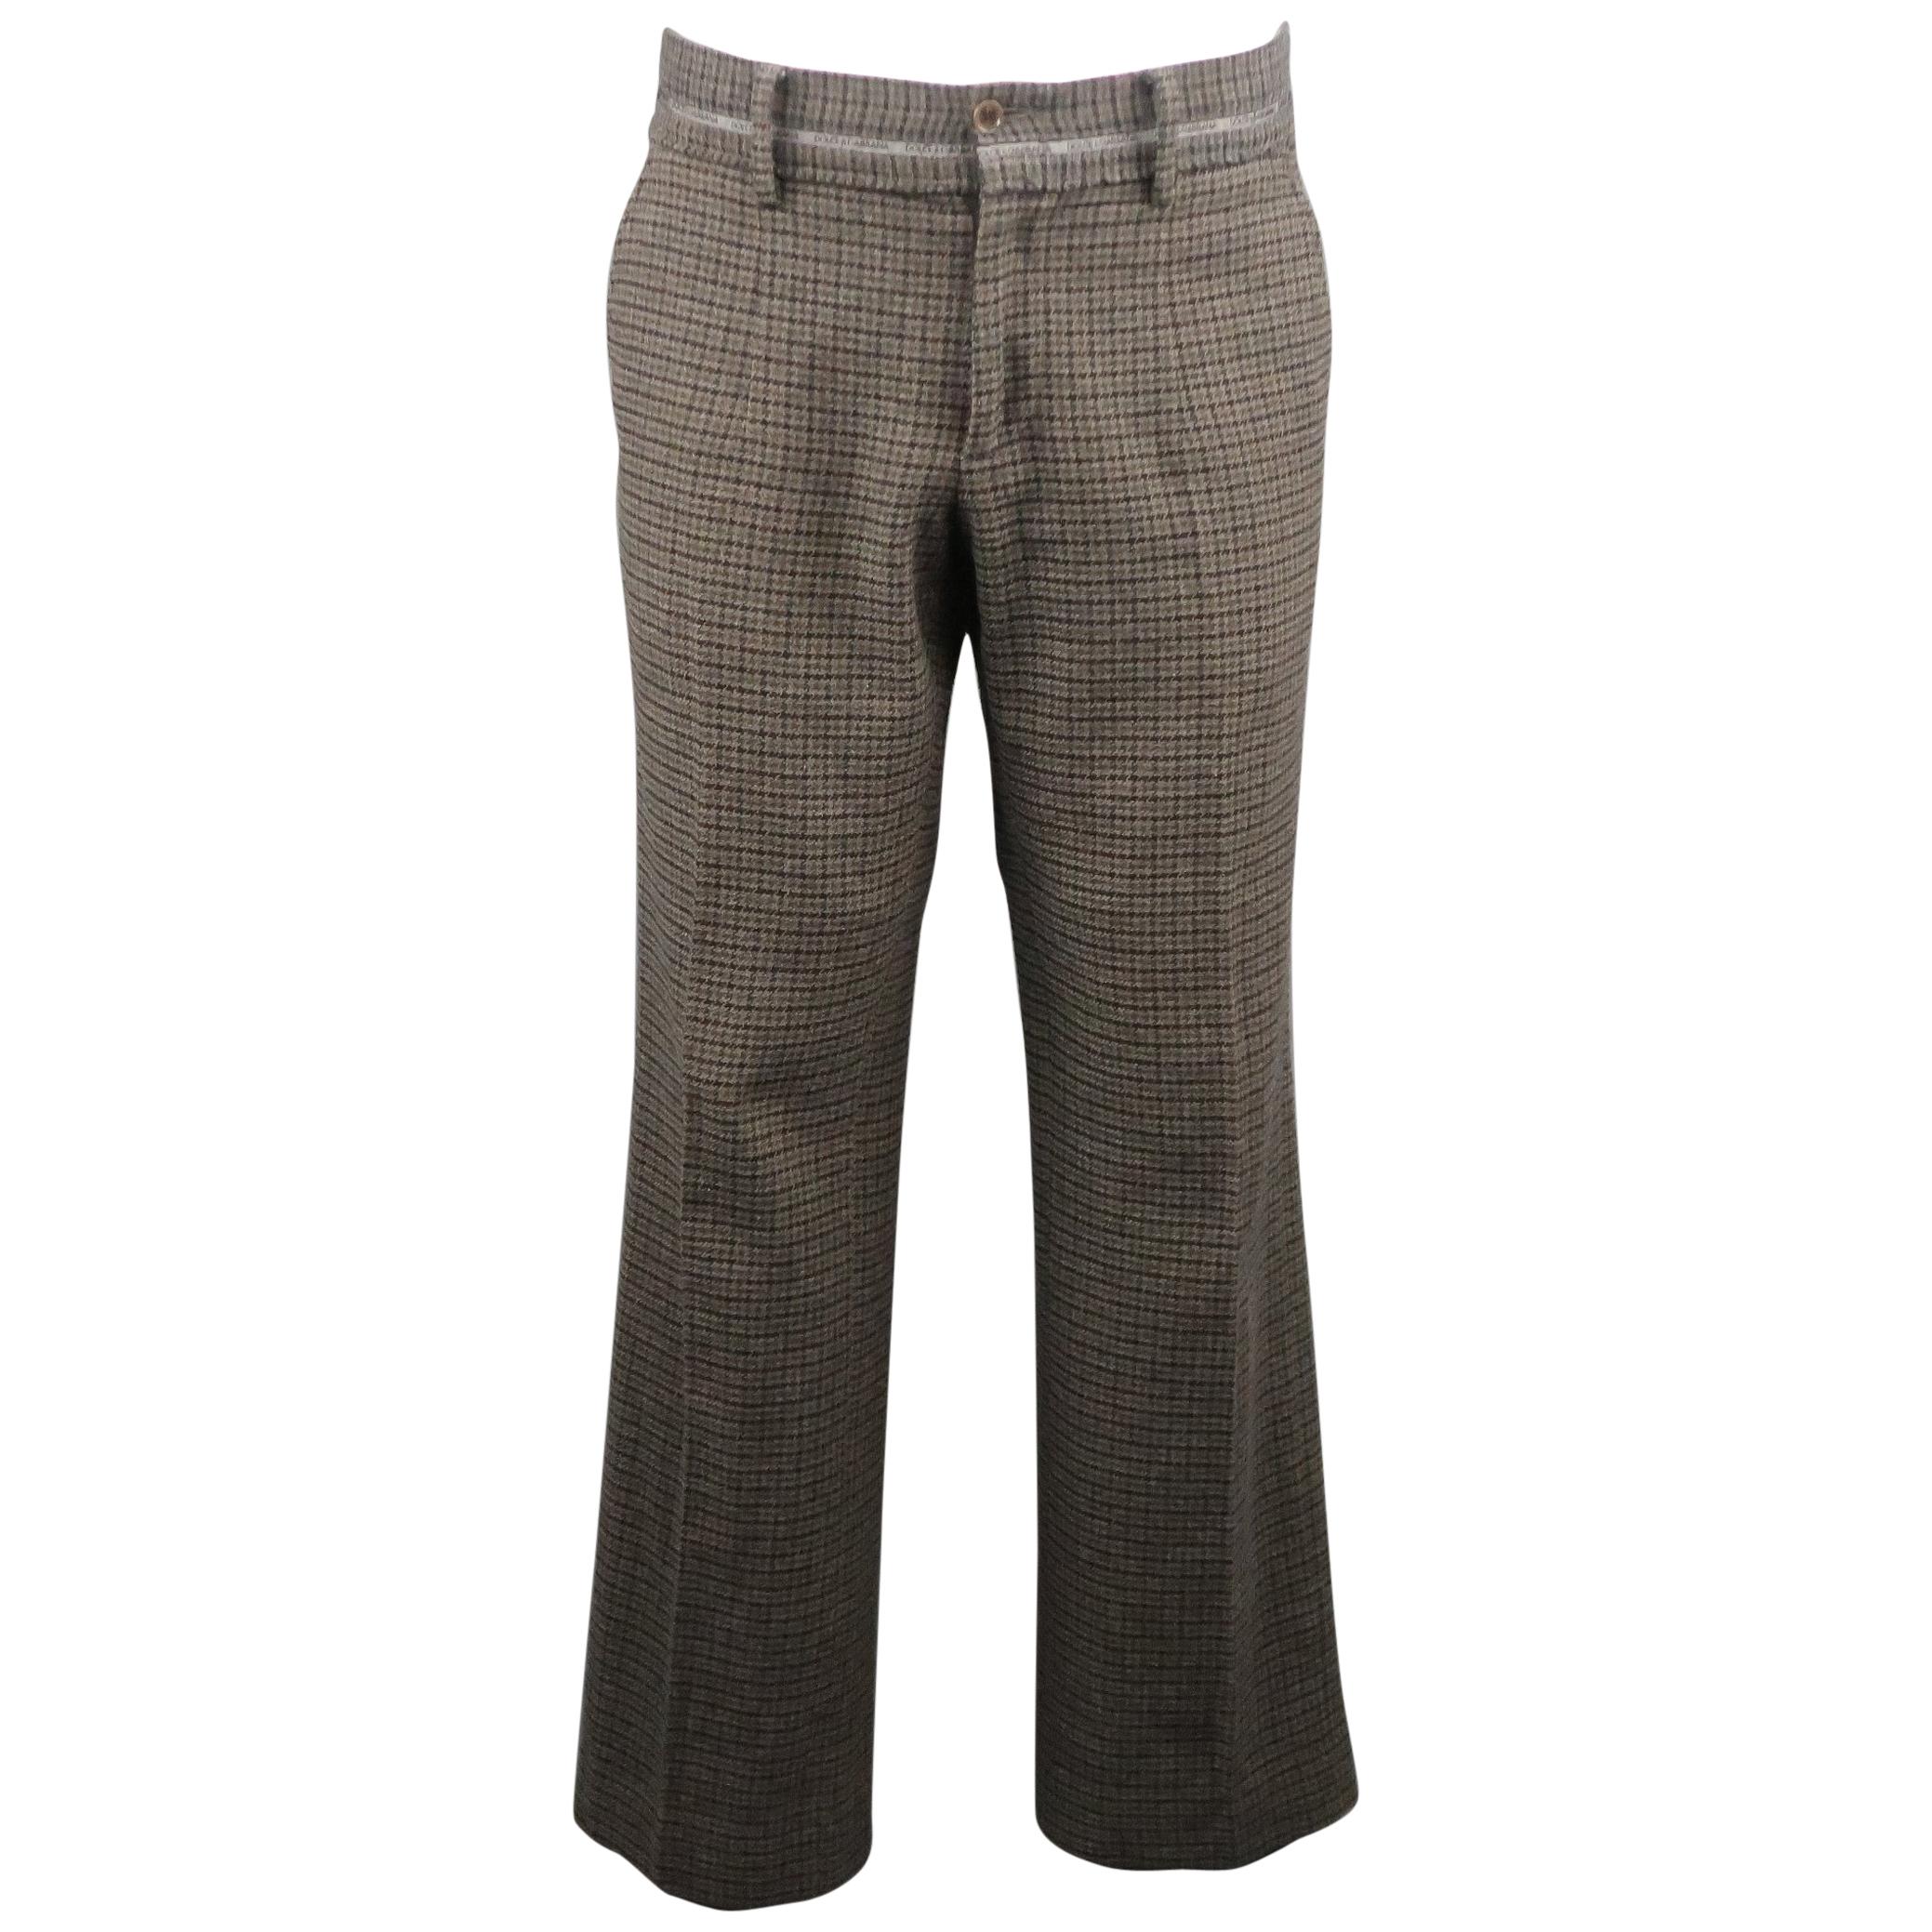 DOLCE & GABBANA Size 34 Grey & Brown Houndstooth Wool / Cotton Casual Pants